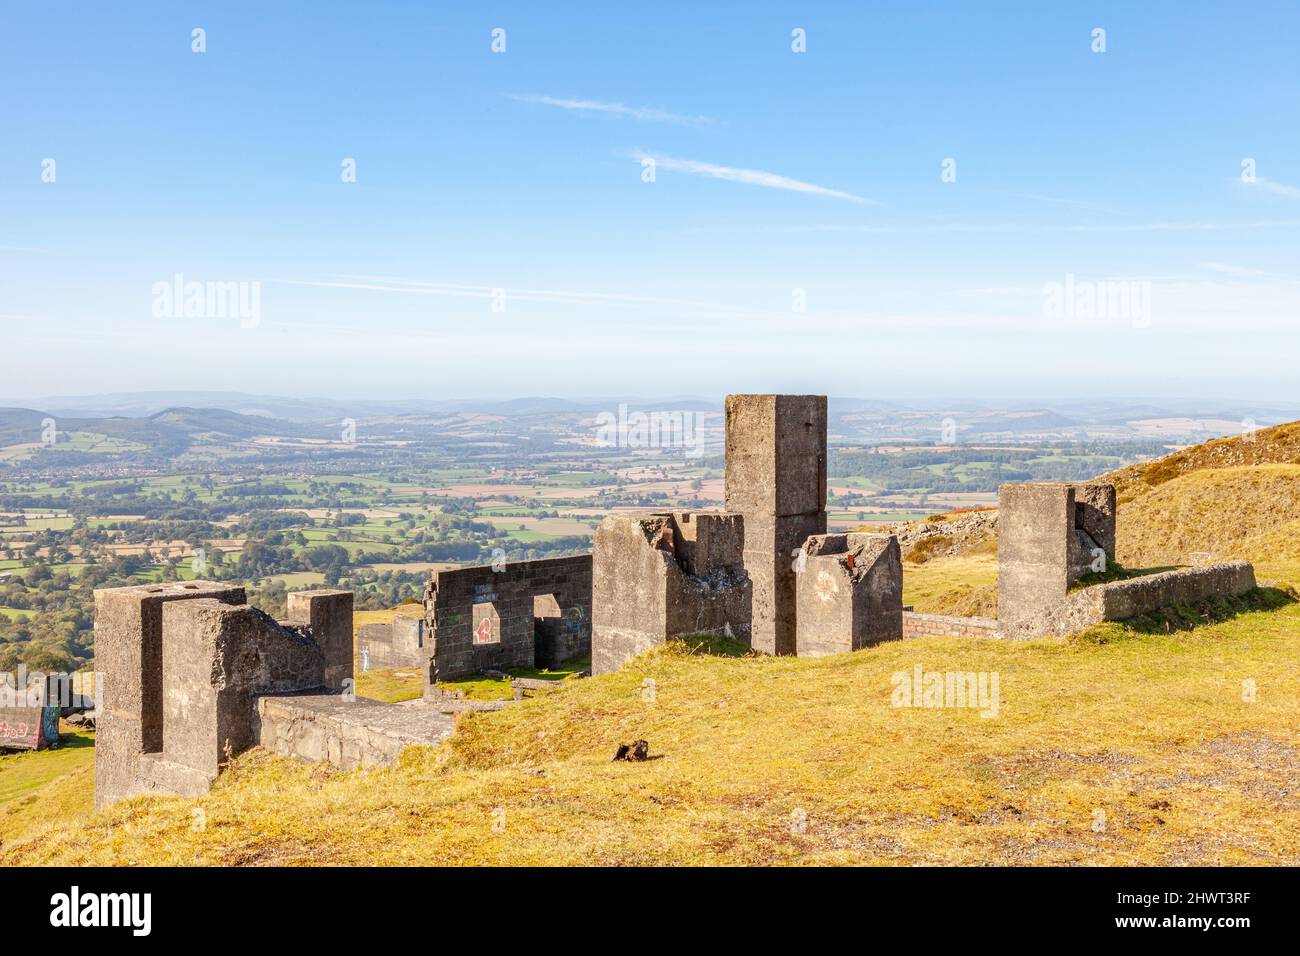 Remains of quarry buildings on Titterston Clee Hill overlooking Shropshire and the Welsh Marches Stock Photo